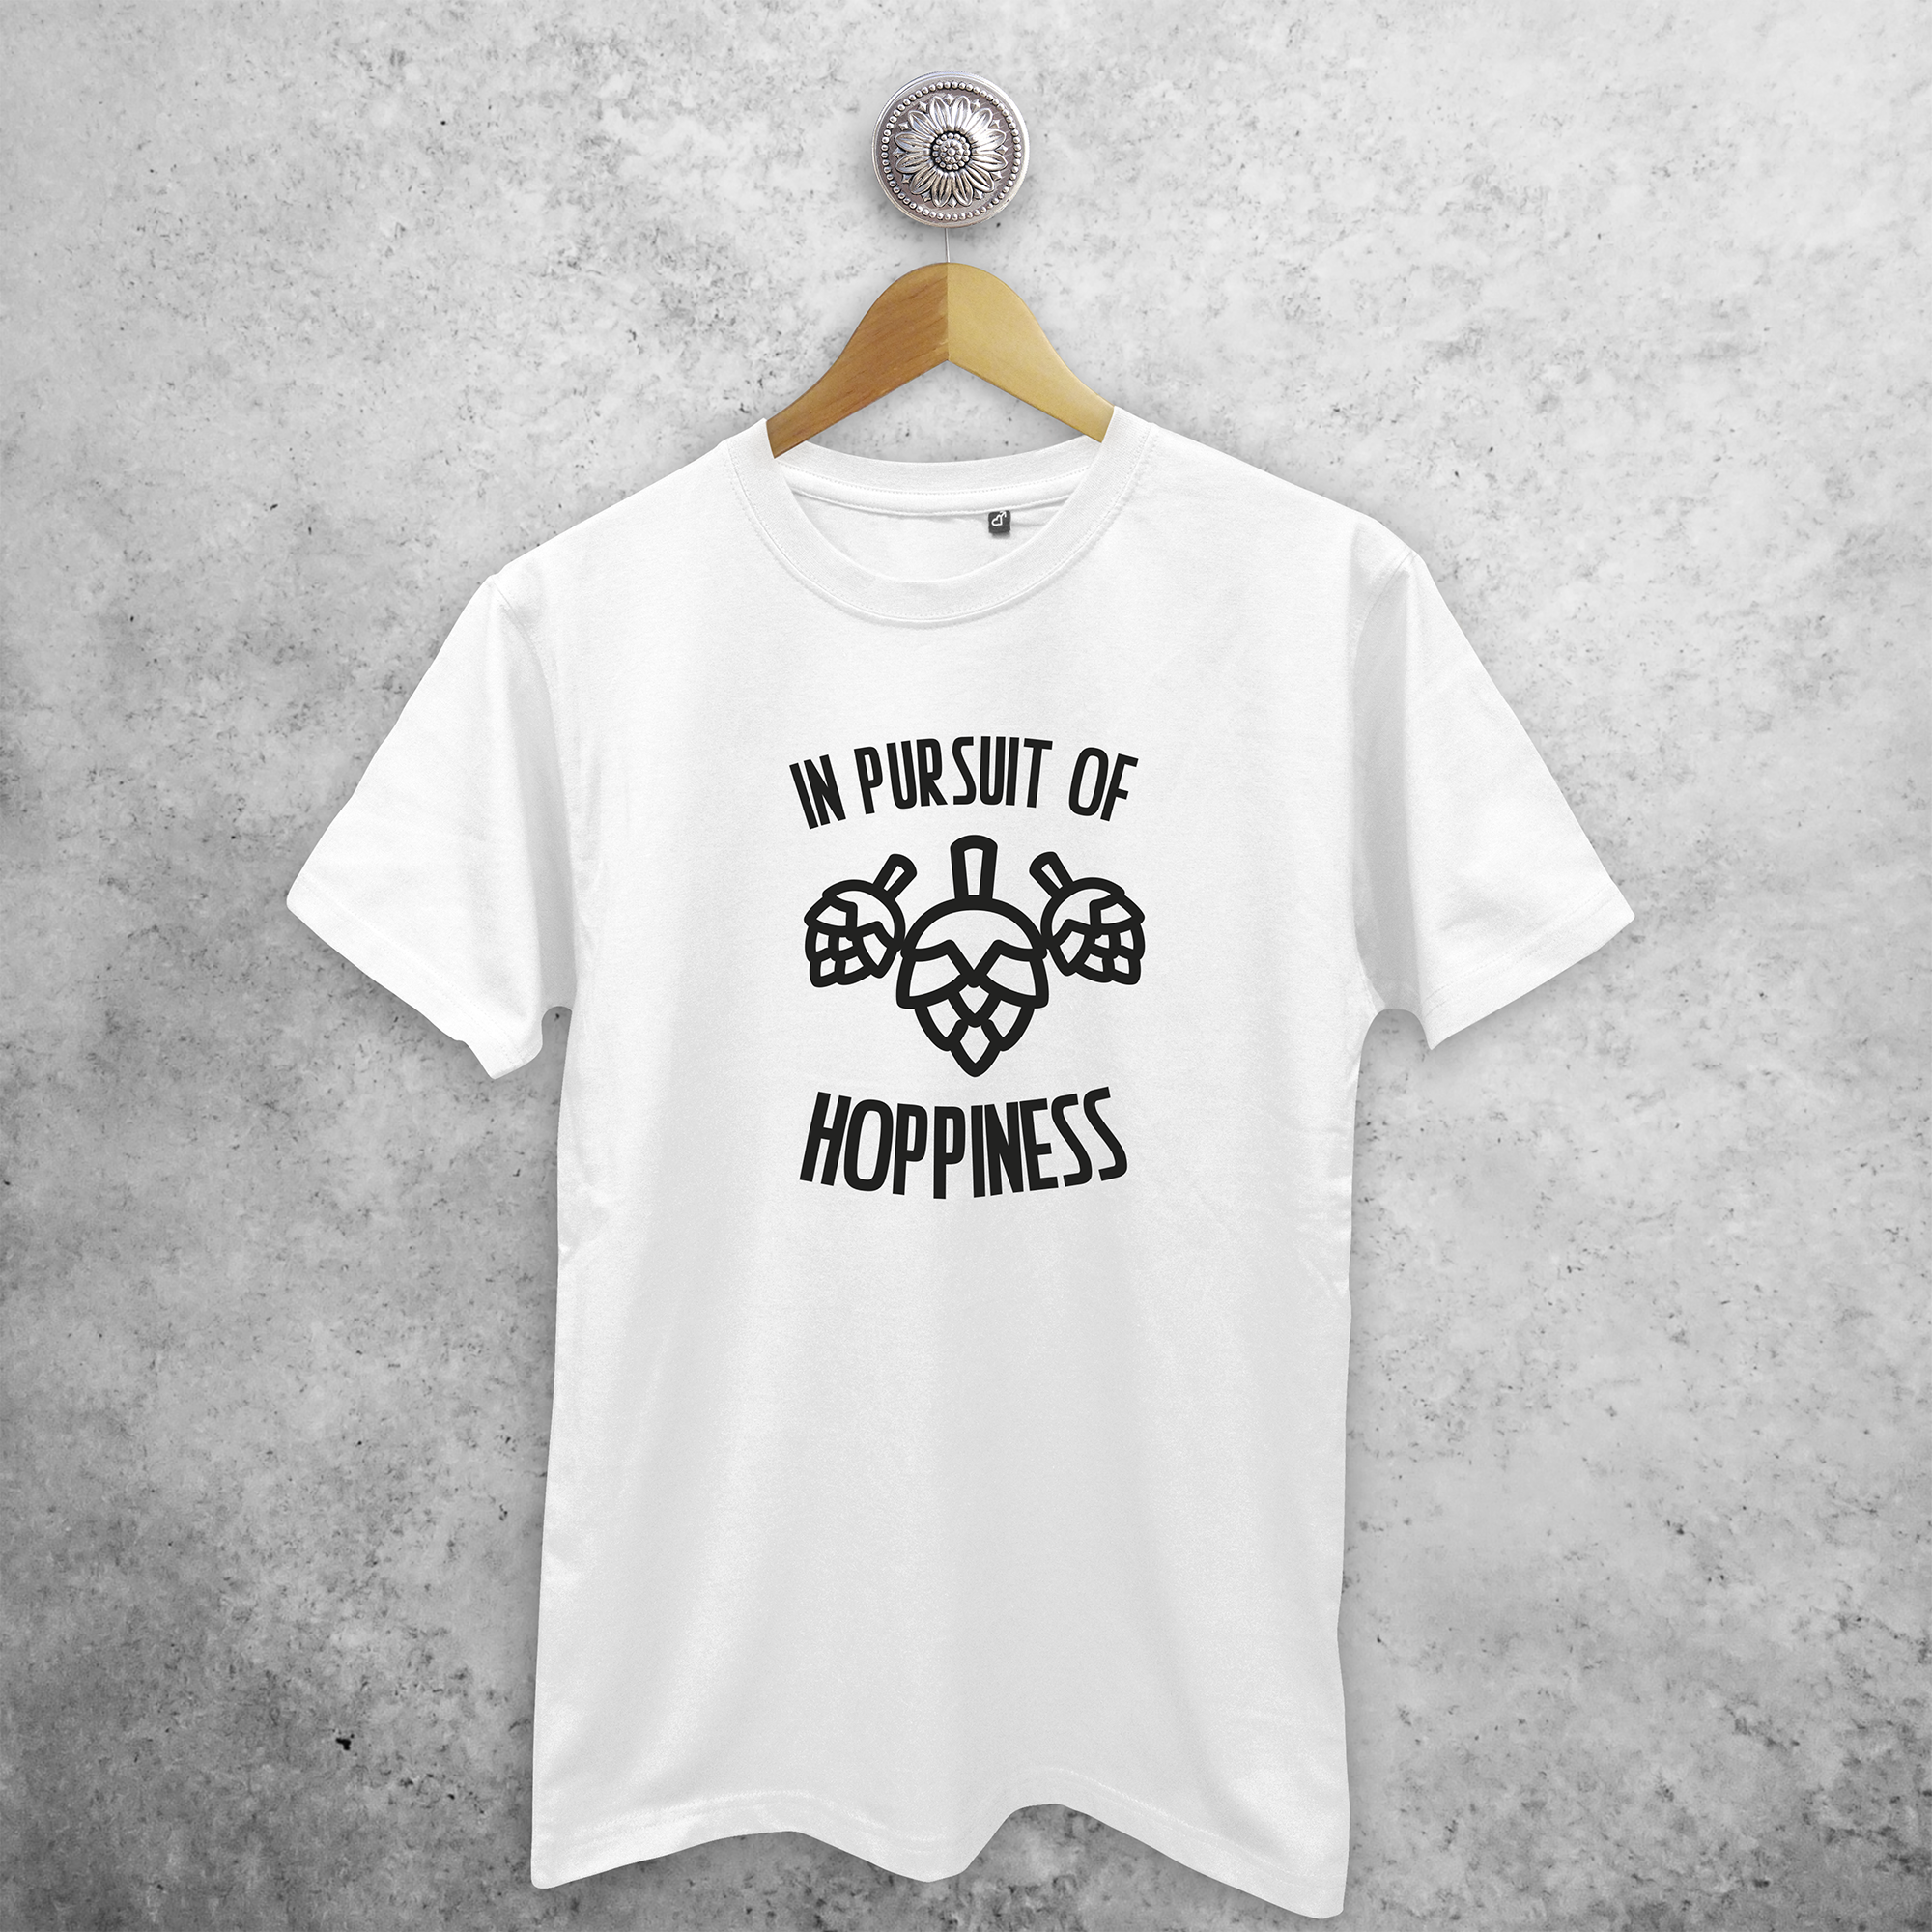 'In pursuit of hoppiness' volwassene shirt